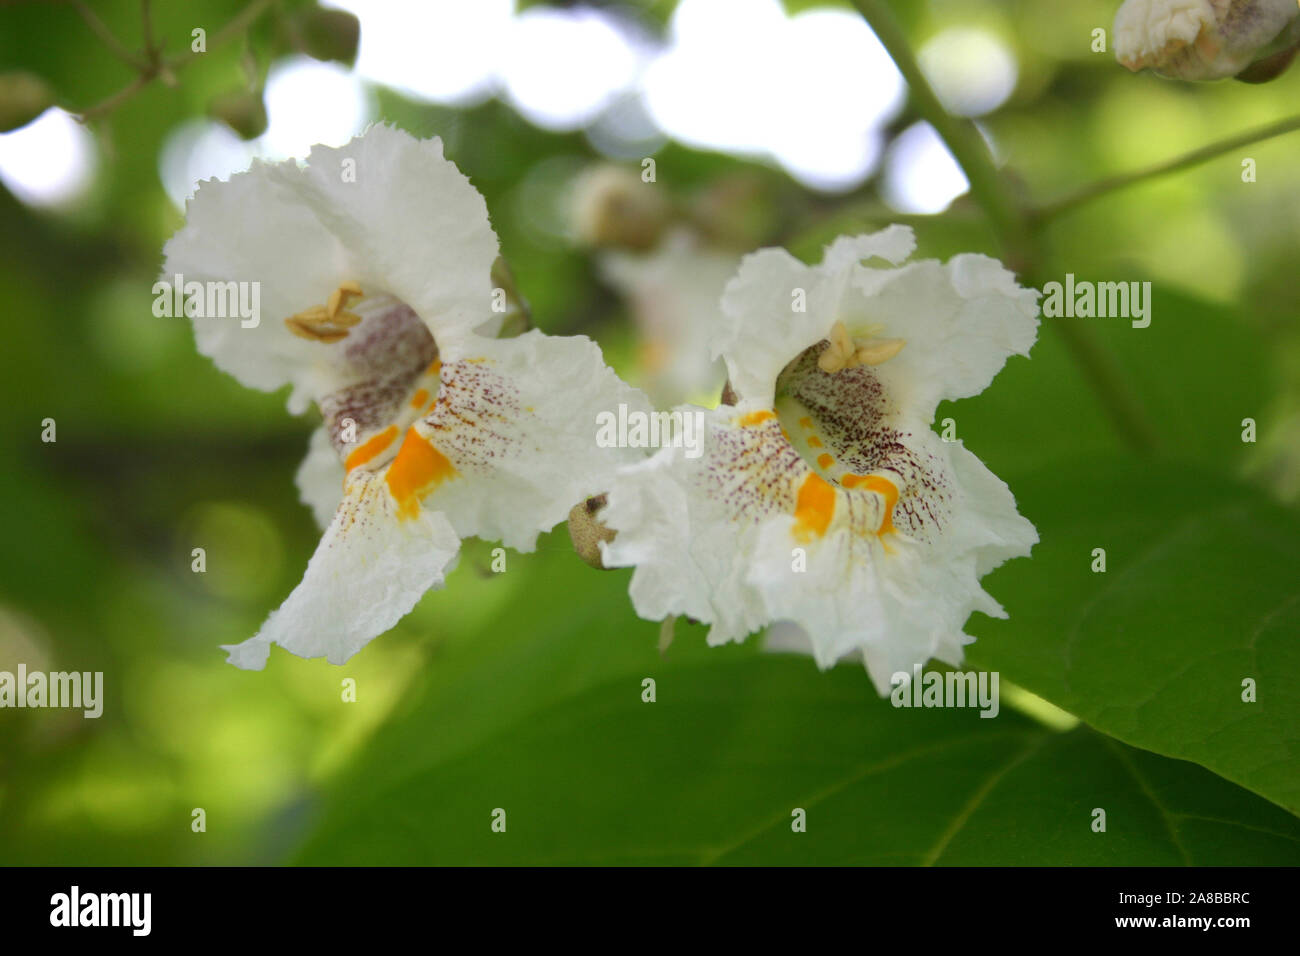 CLOSE-UP OF THE FLOWERS OF CATALPA BIGNONIOIDES CV. AUREA (COMMONLY KNOWN AS SOUTHERN CATALPA, CIGARTREE AND INDIAN-BEAN TREE. Stock Photo